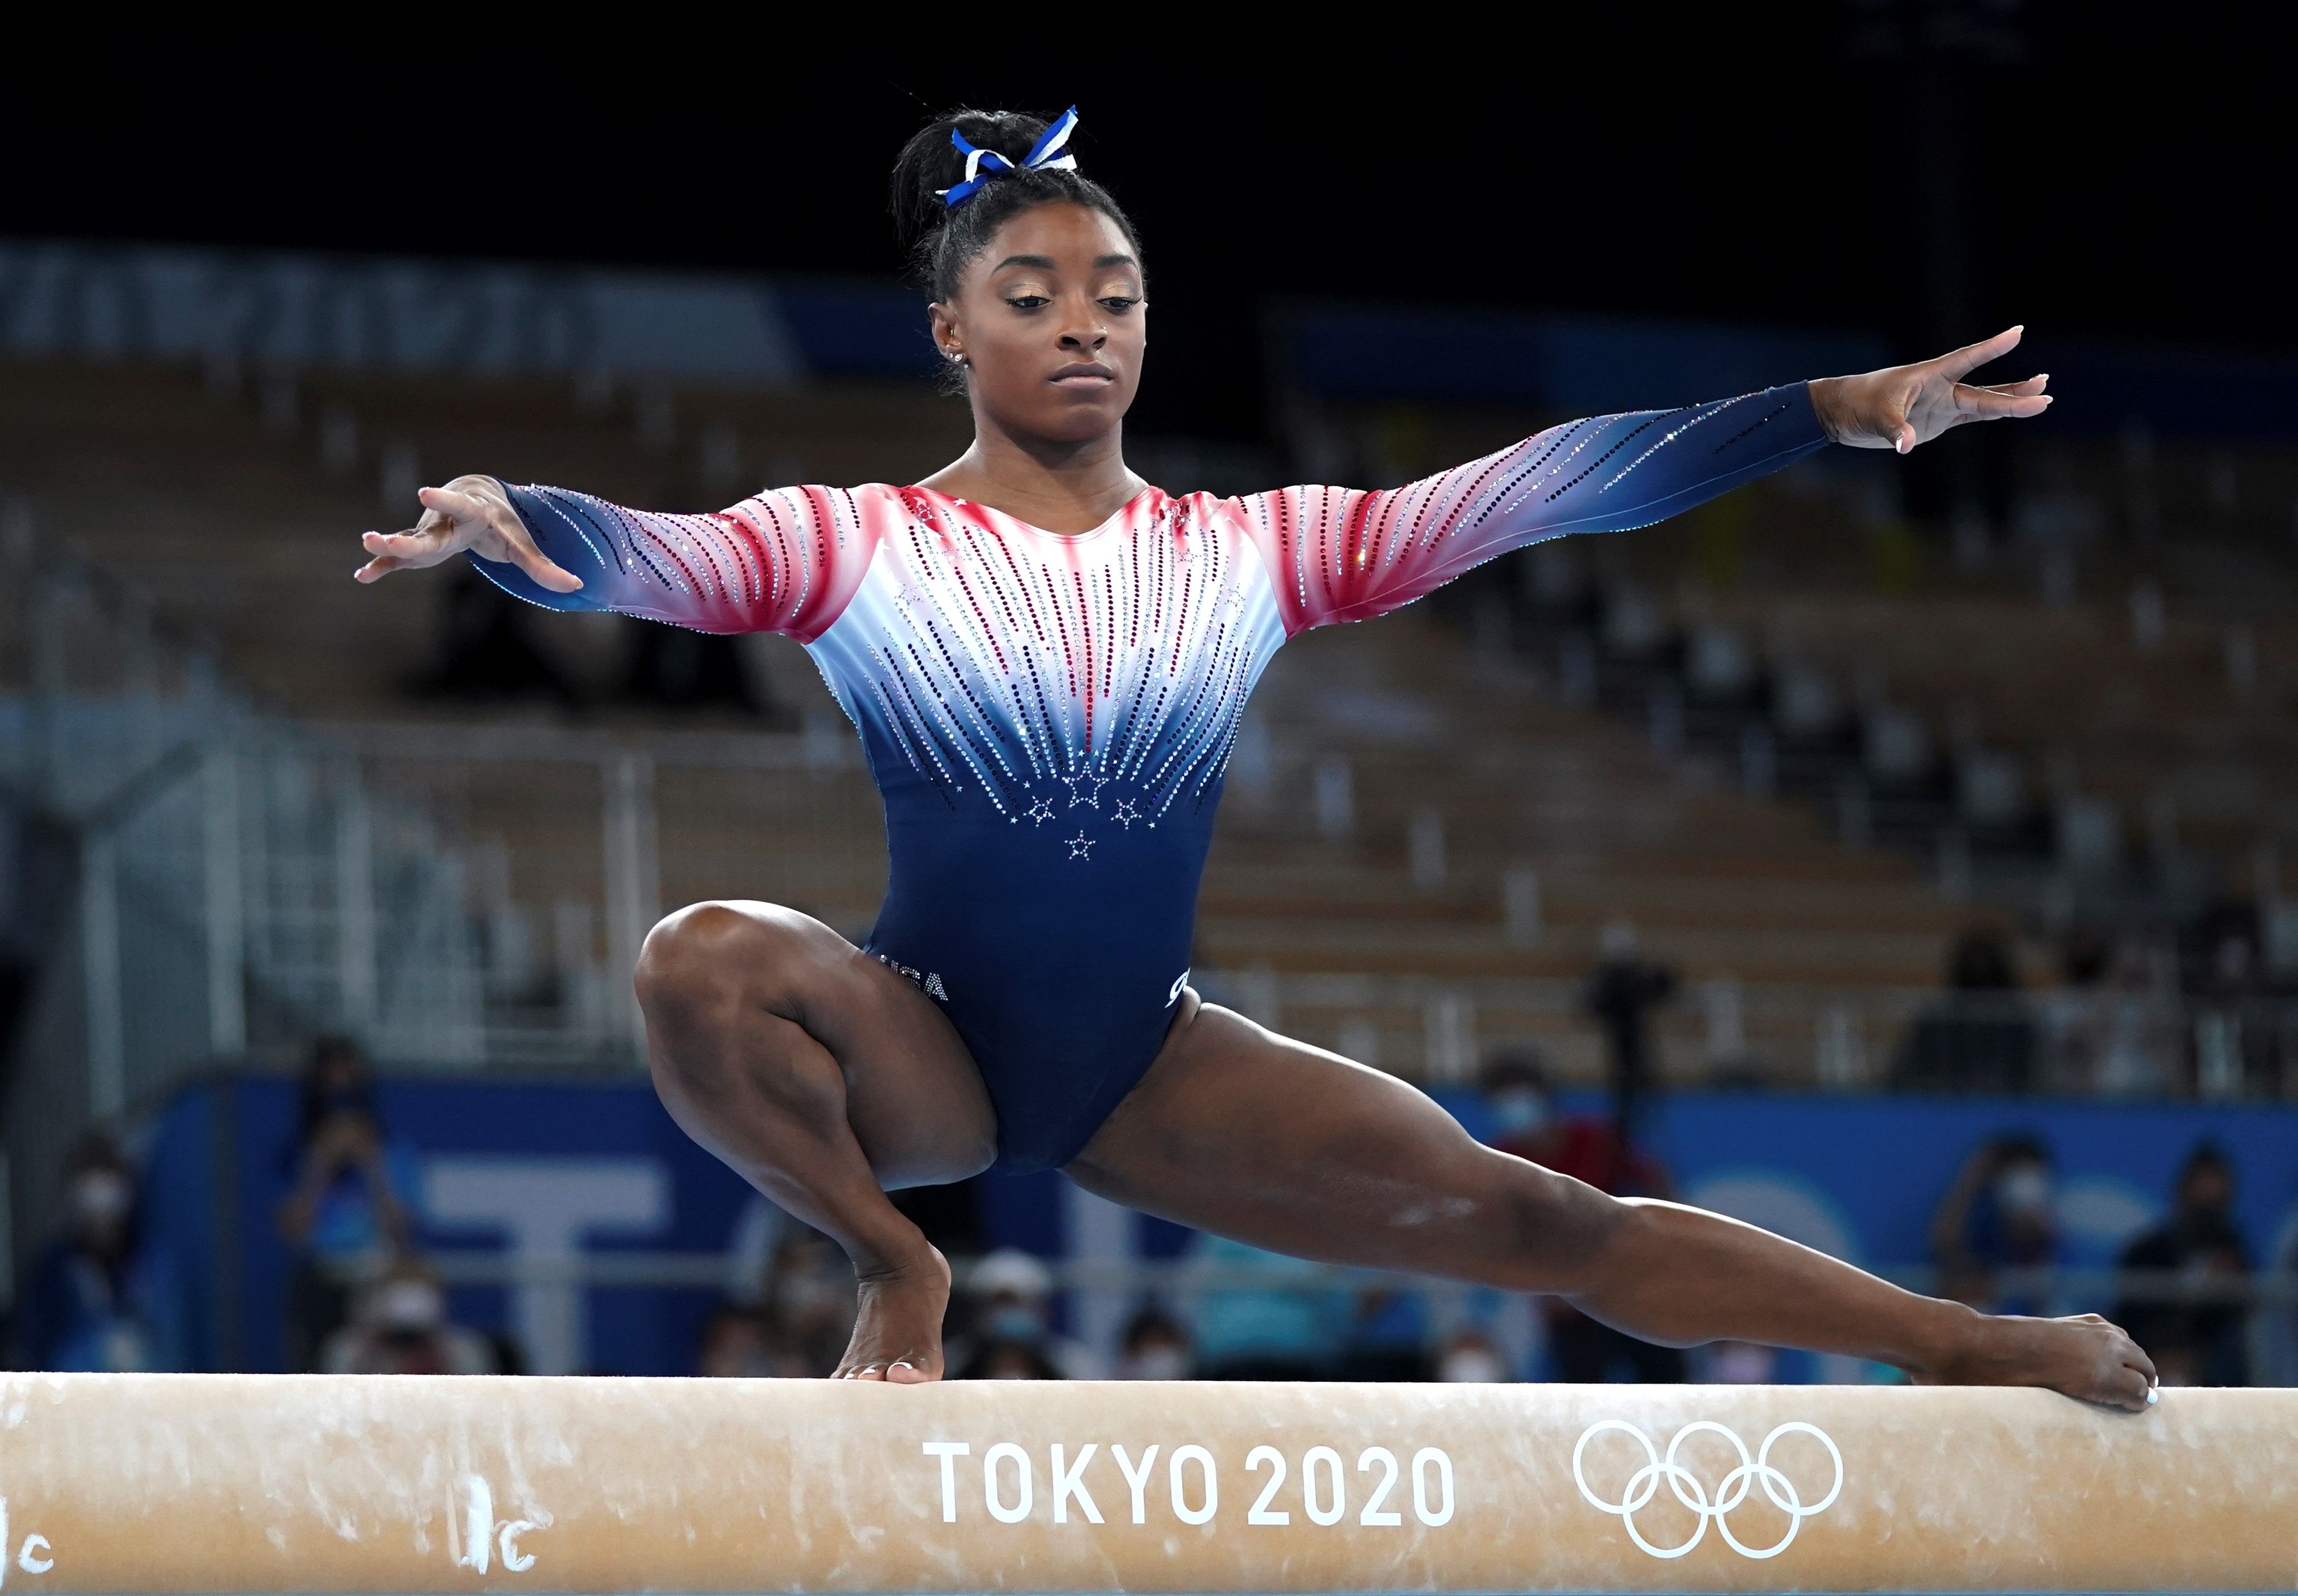 Will Simone Biles Compete At The 2024 Olympic Games? The Gymnast Hints At  'Unfinished Business